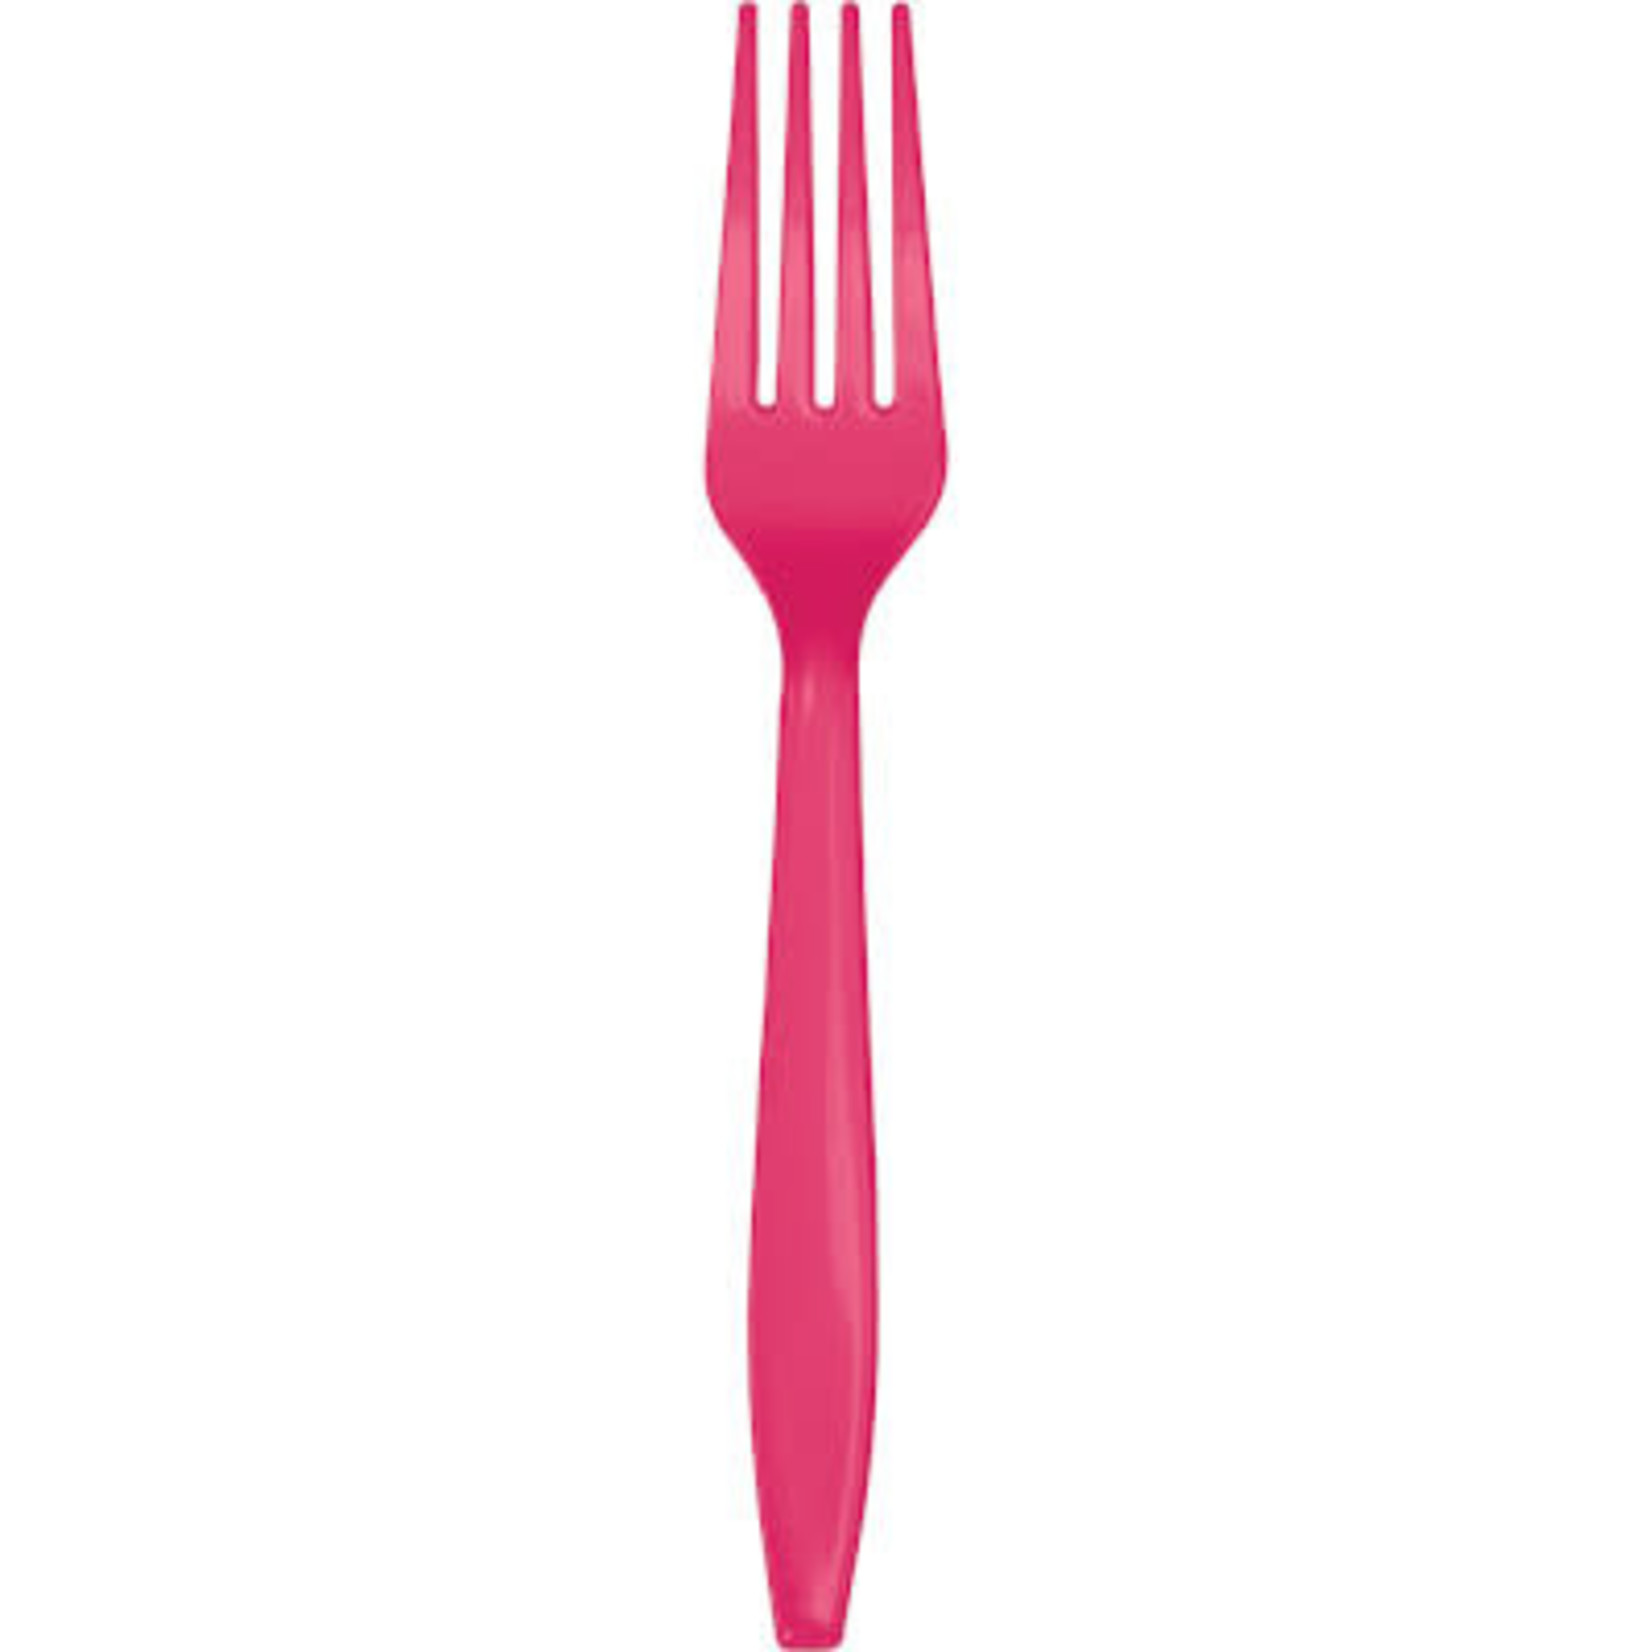 Touch of Color Magenta Pink Premium Plastic Forks - 24ct.